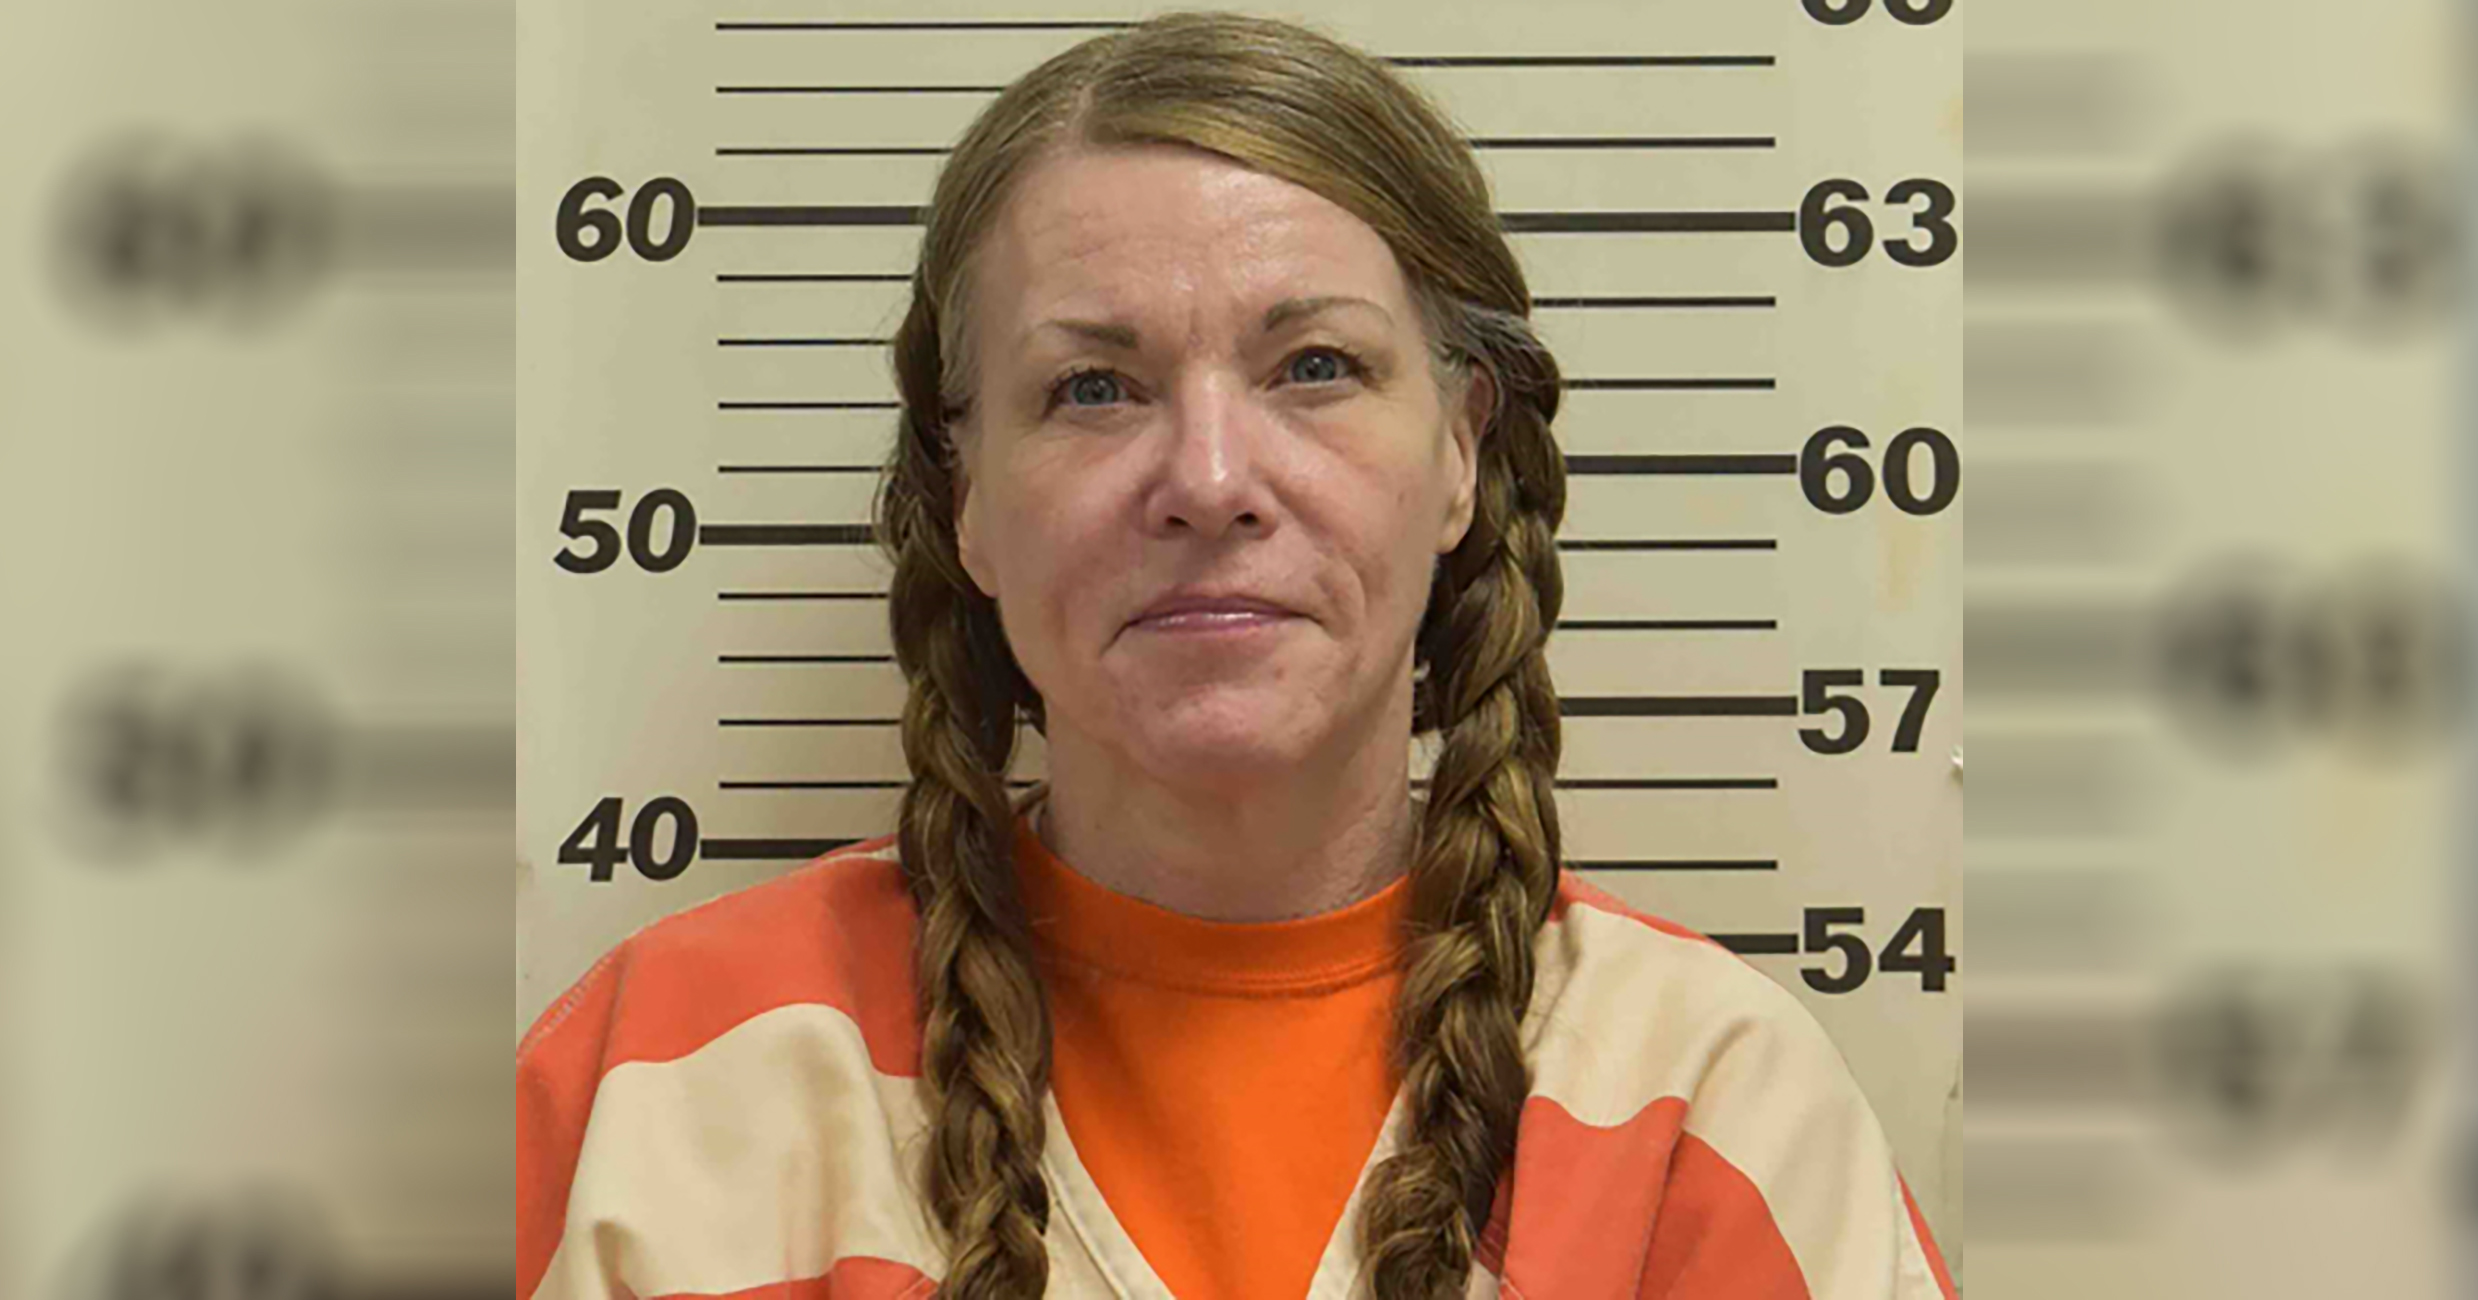 PHOTO: Lori Vallow Daybell mugshot released by the Madison County Sheriff Office